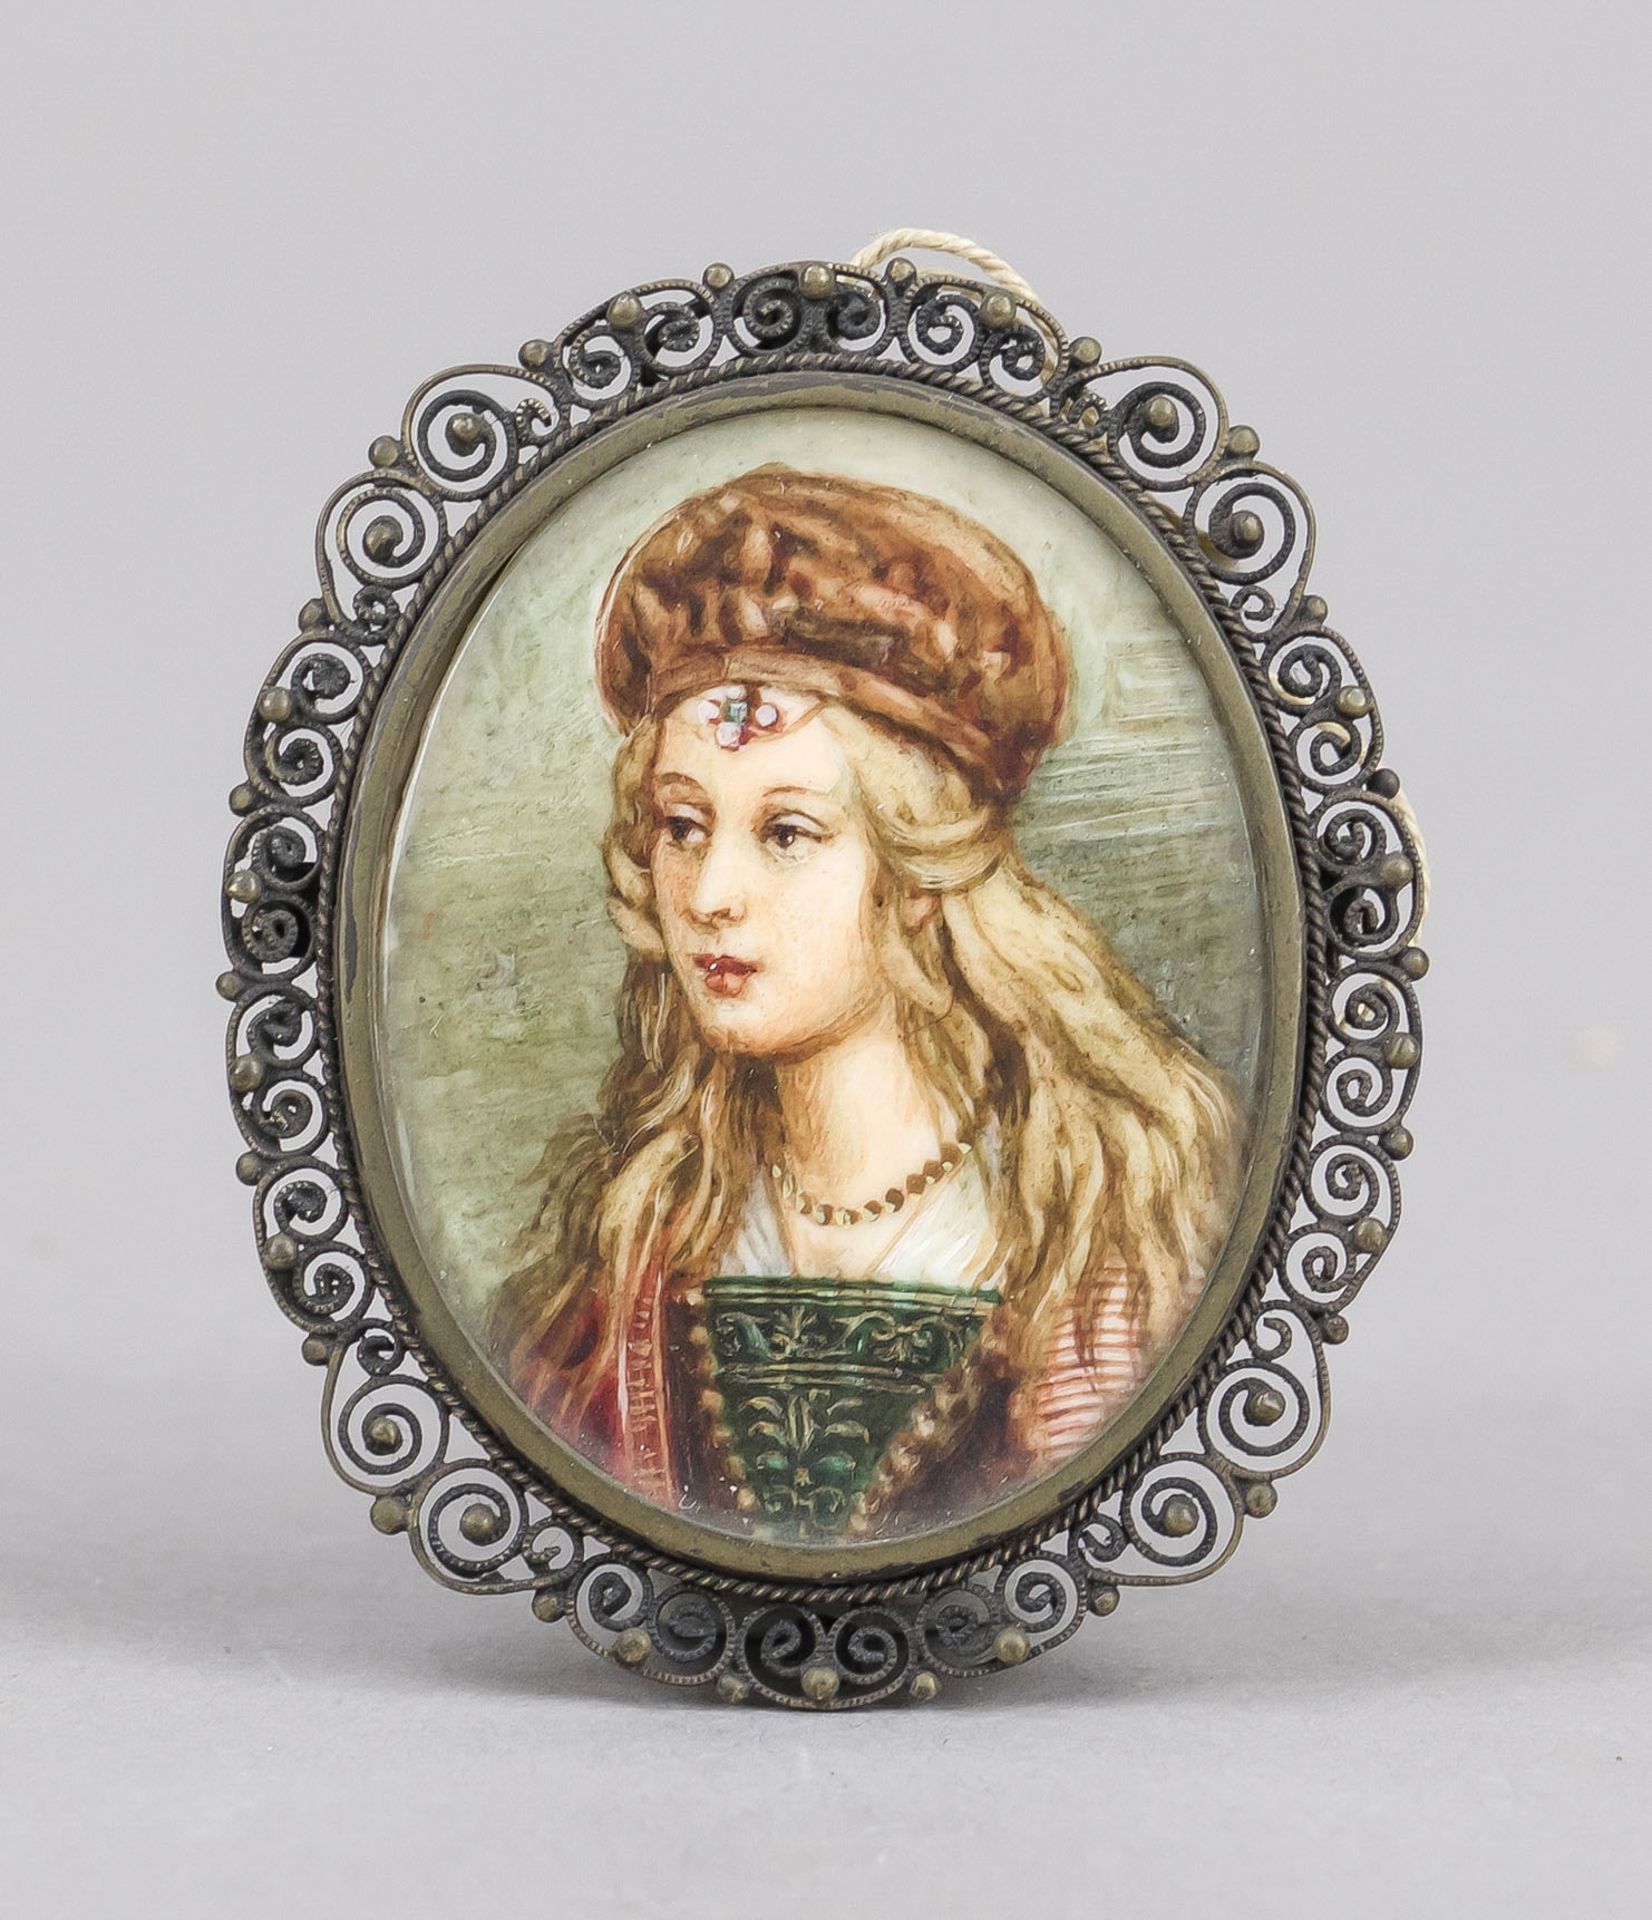 Oval miniature, Italian, early 20th century, polychrome tempera painting on bone plate. Young